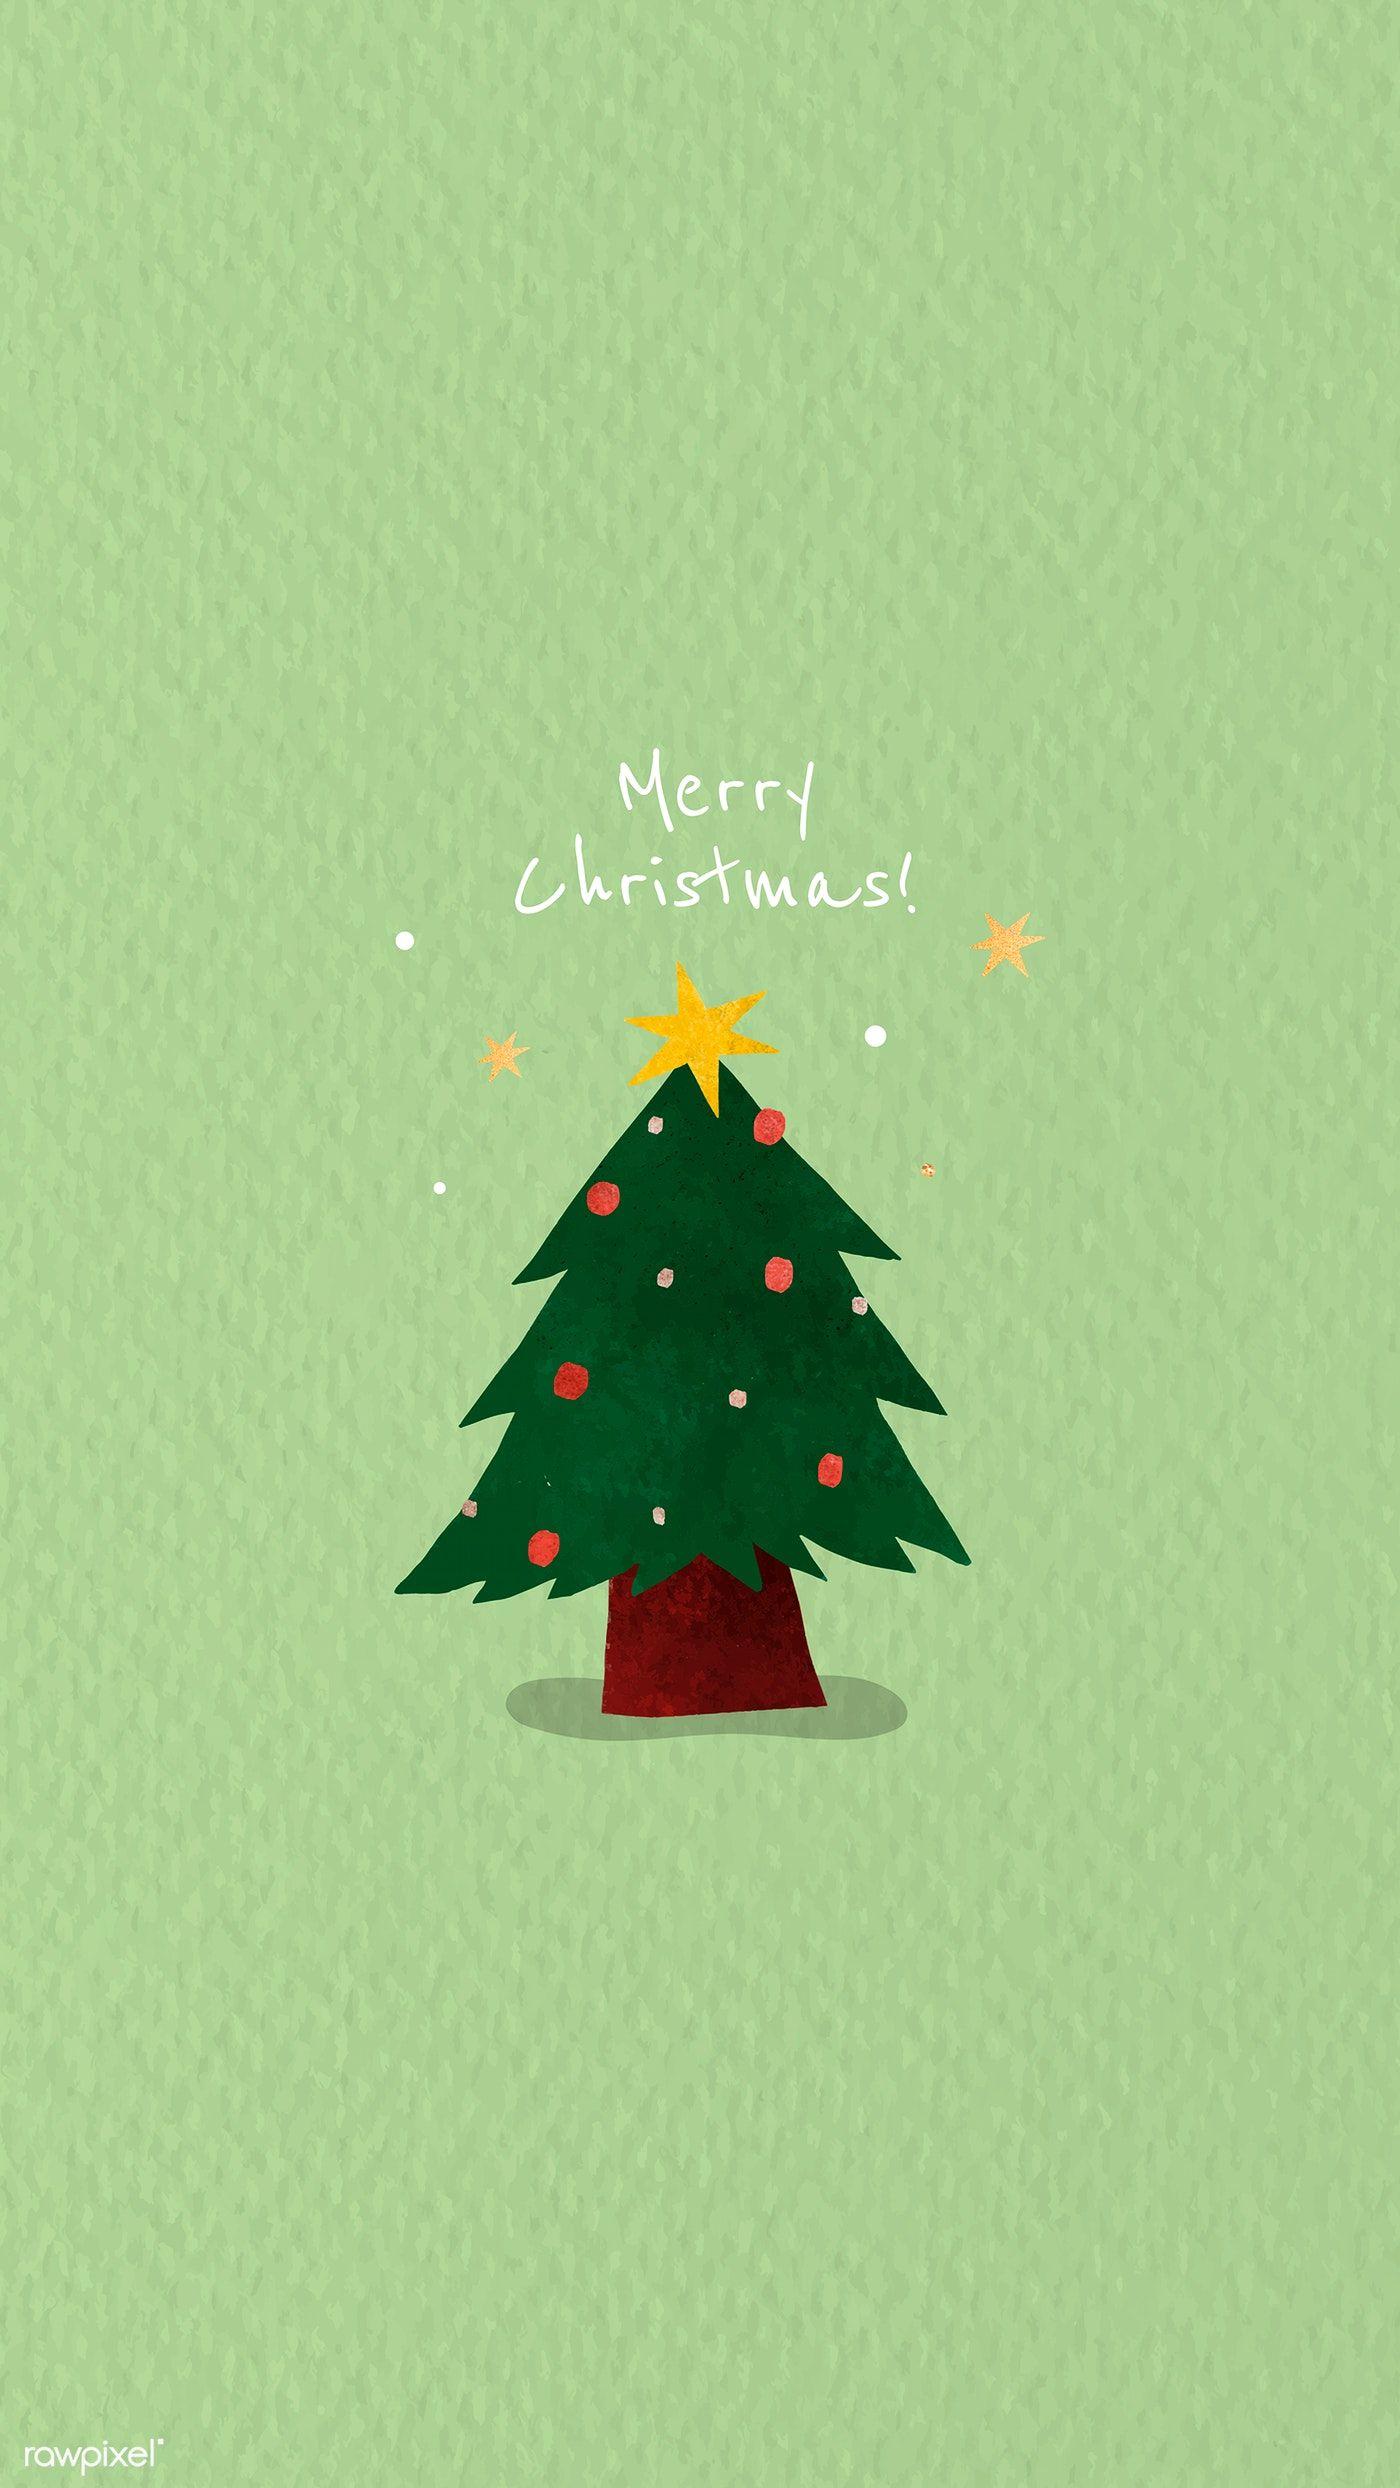 Christmas tree doodle background vector premium image by